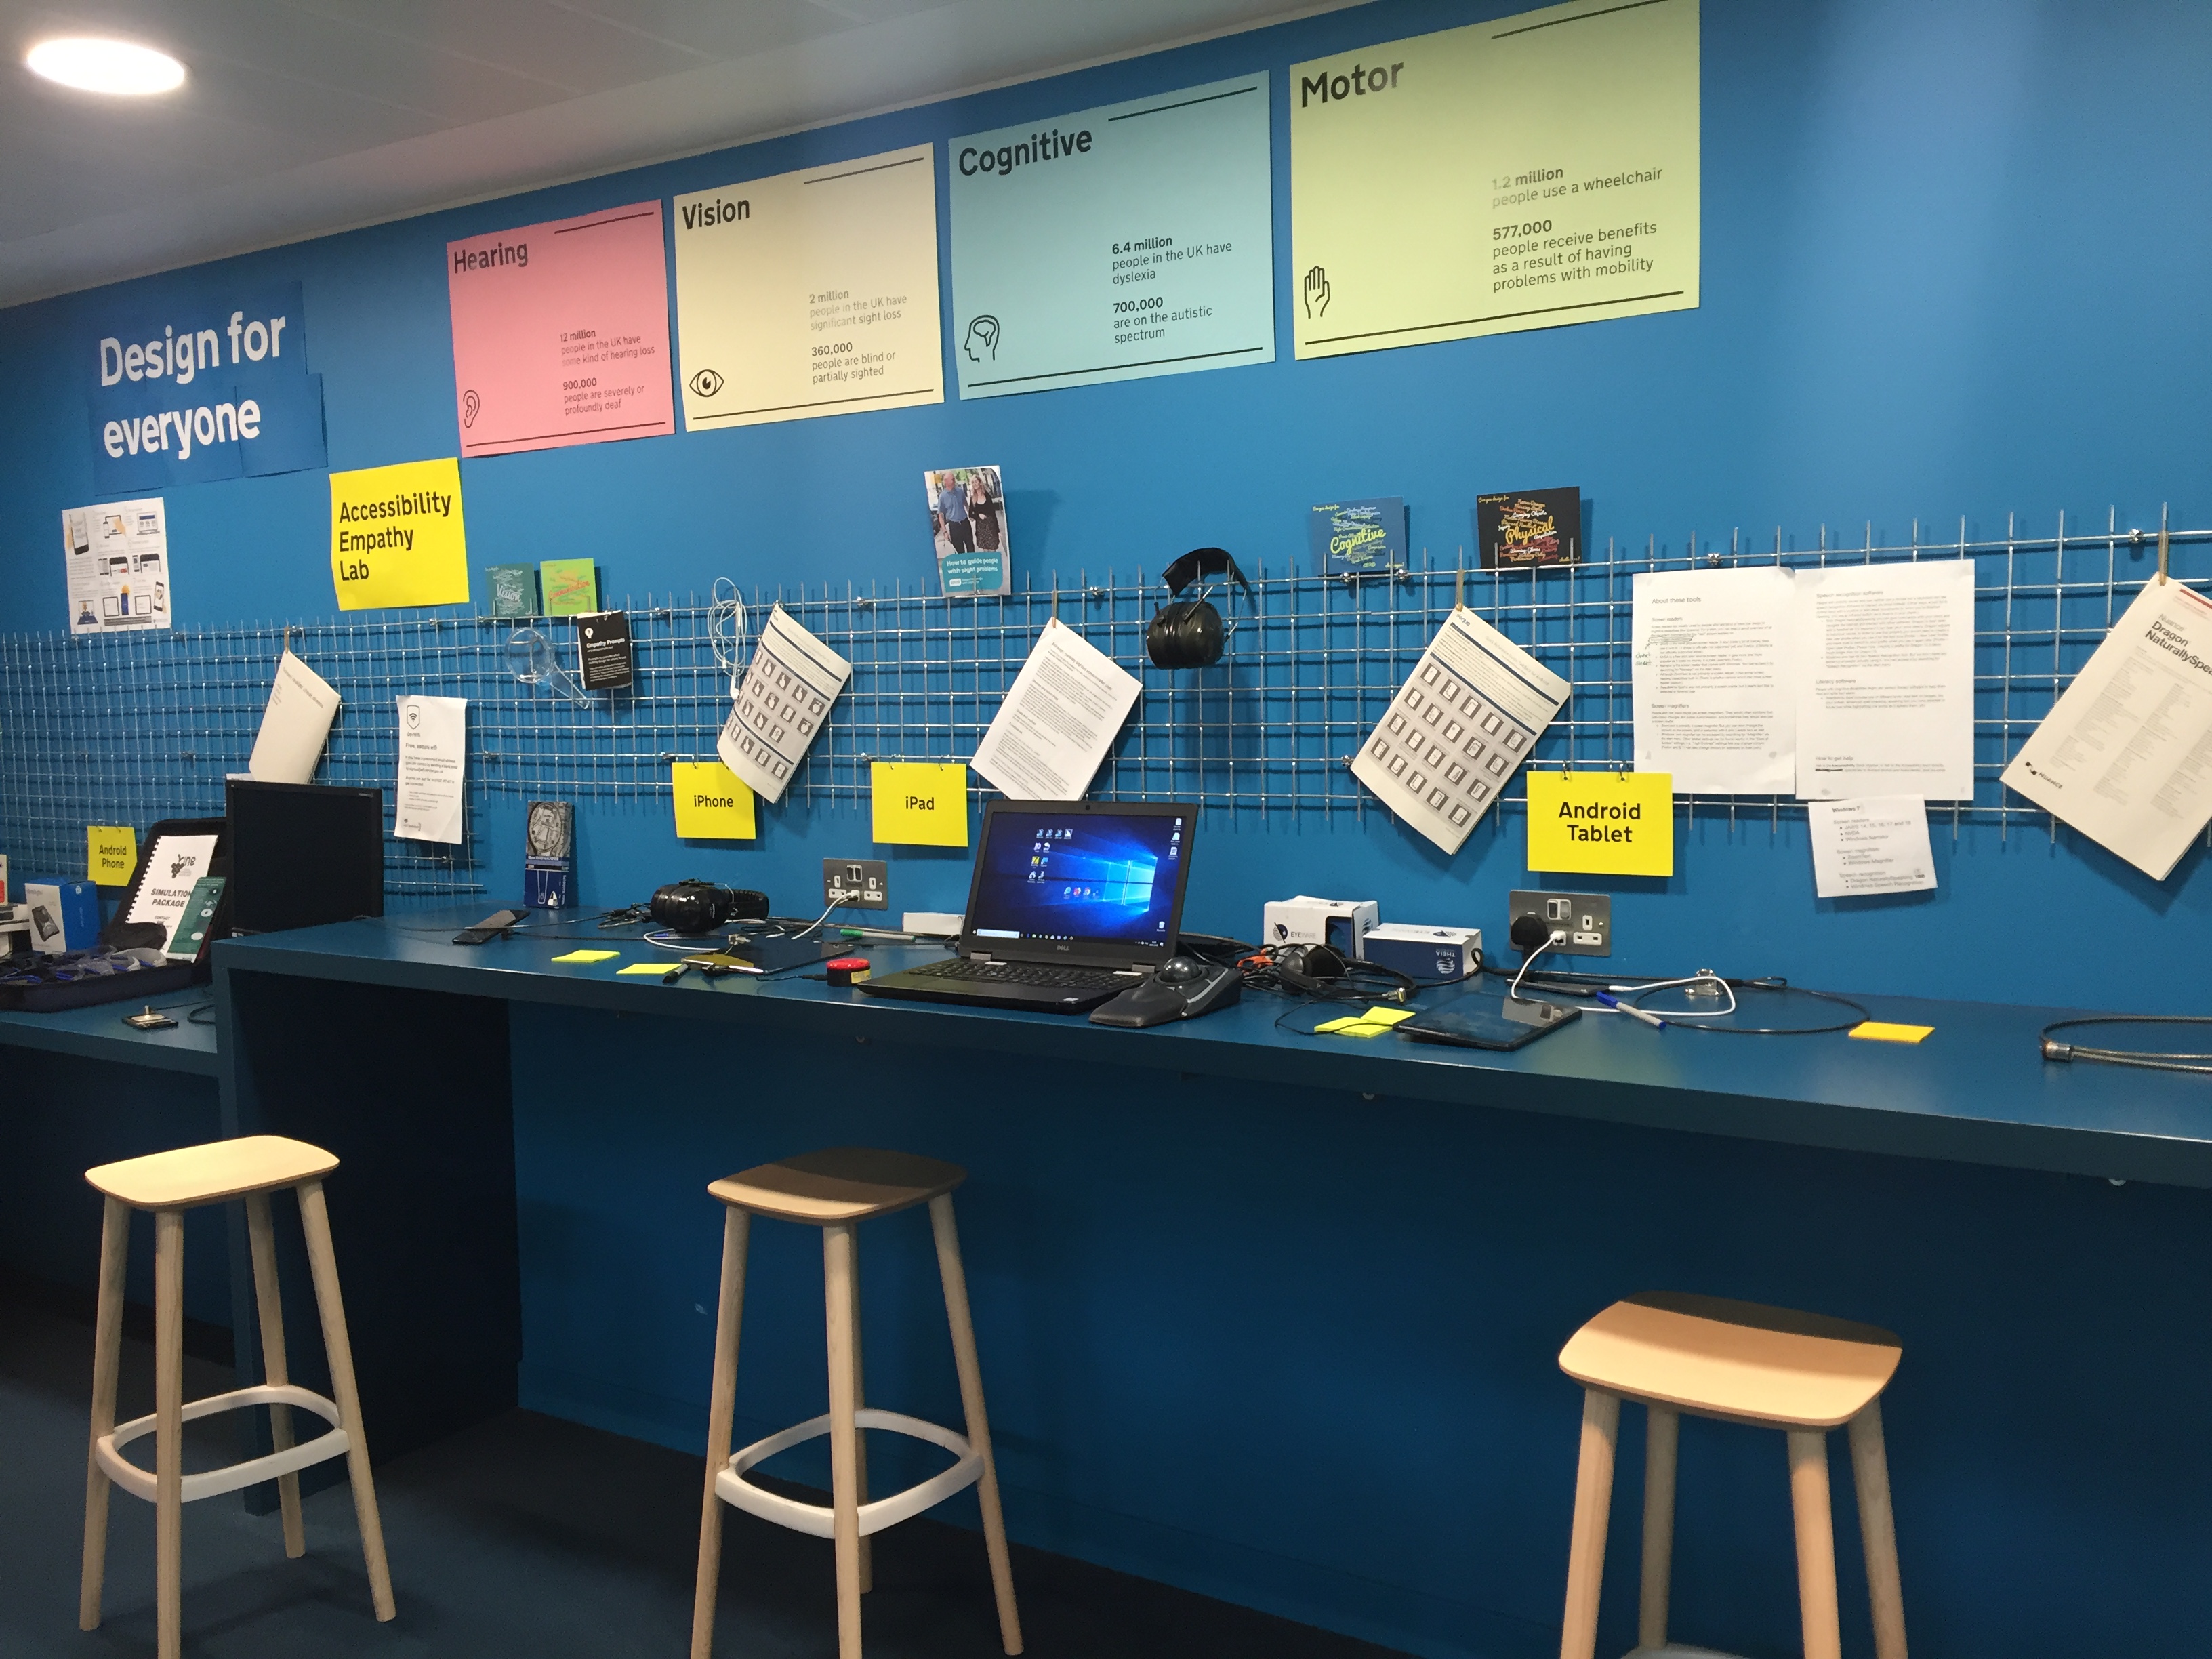 The accessibility empathy lab at GDS with computers, accessibility equipment and posters.